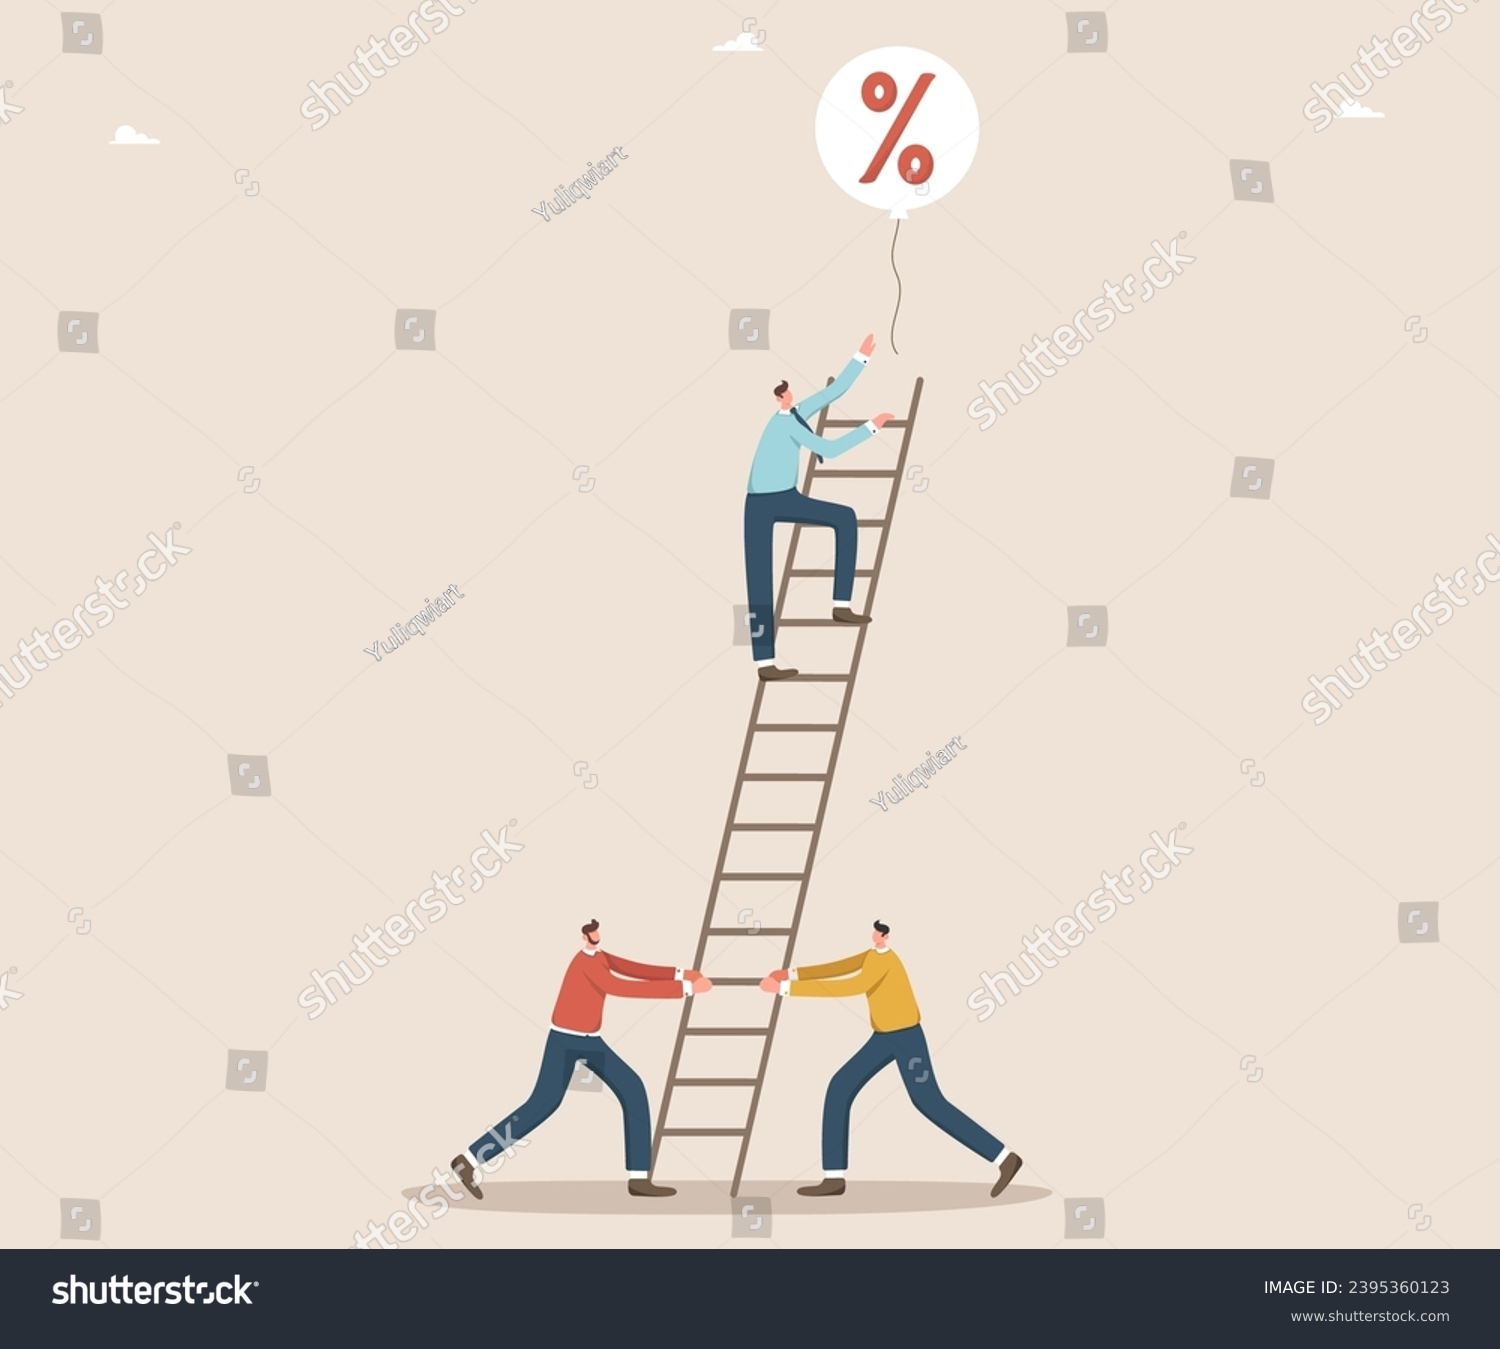 SVG of Leadership in increasing investment portfolio, income or savings, mentoring in creating safe deposit boxes, receiving interest payments, comrades hold ladder and colleague catches interest ballon. svg